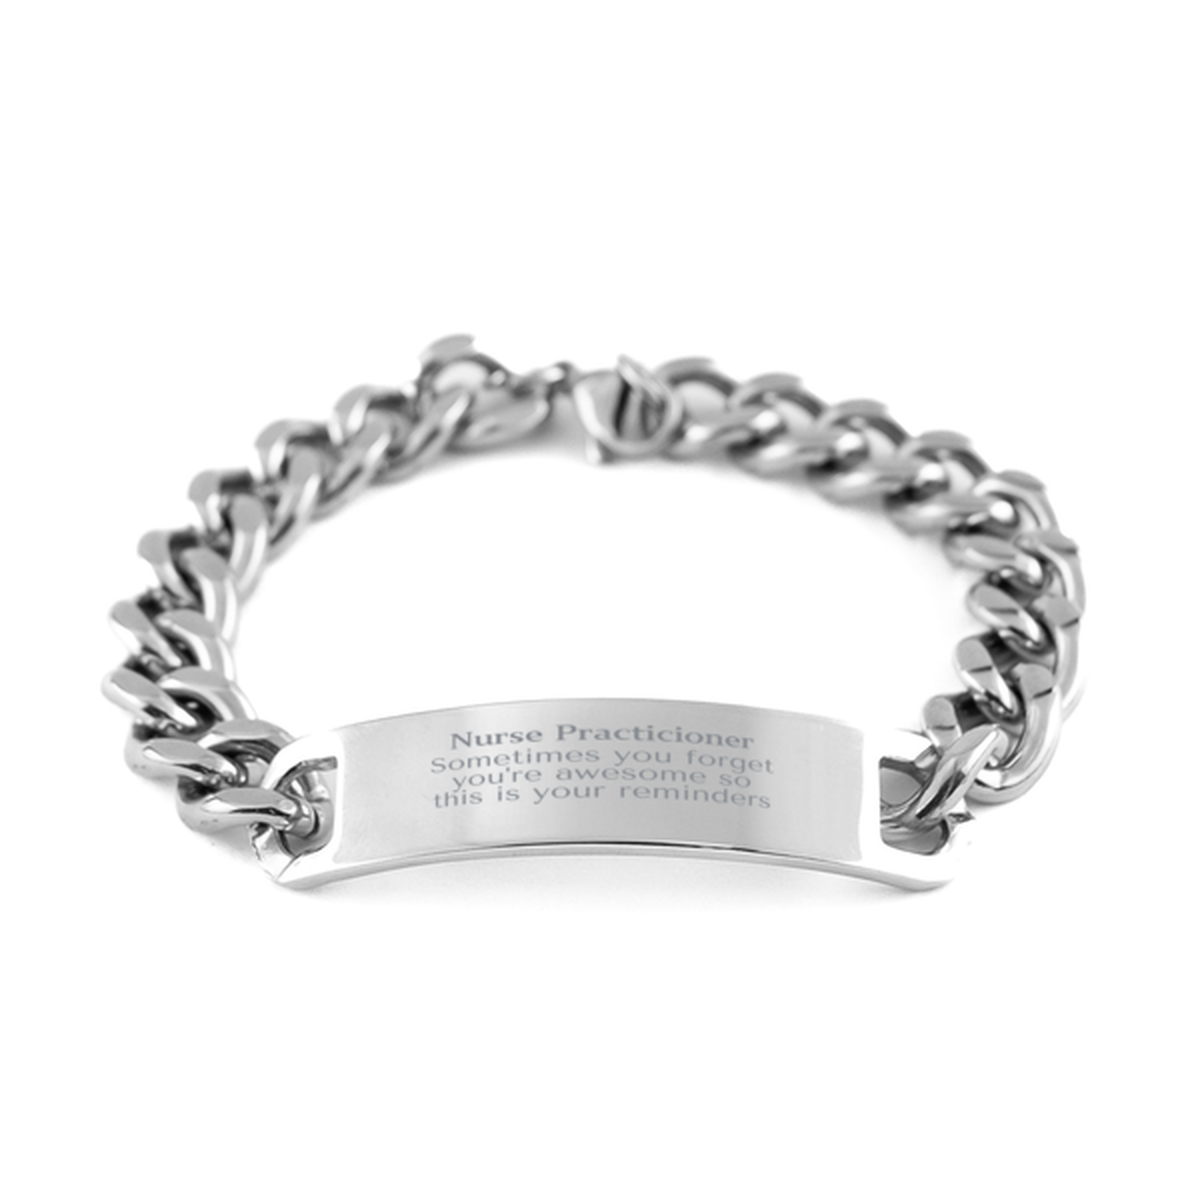 Sentimental Nurse Practicioner Cuban Chain Stainless Steel Bracelet, Nurse Practicioner Sometimes you forget you're awesome so this is your reminders, Graduation Christmas Birthday Gifts for Nurse Practicioner, Men, Women, Coworkers